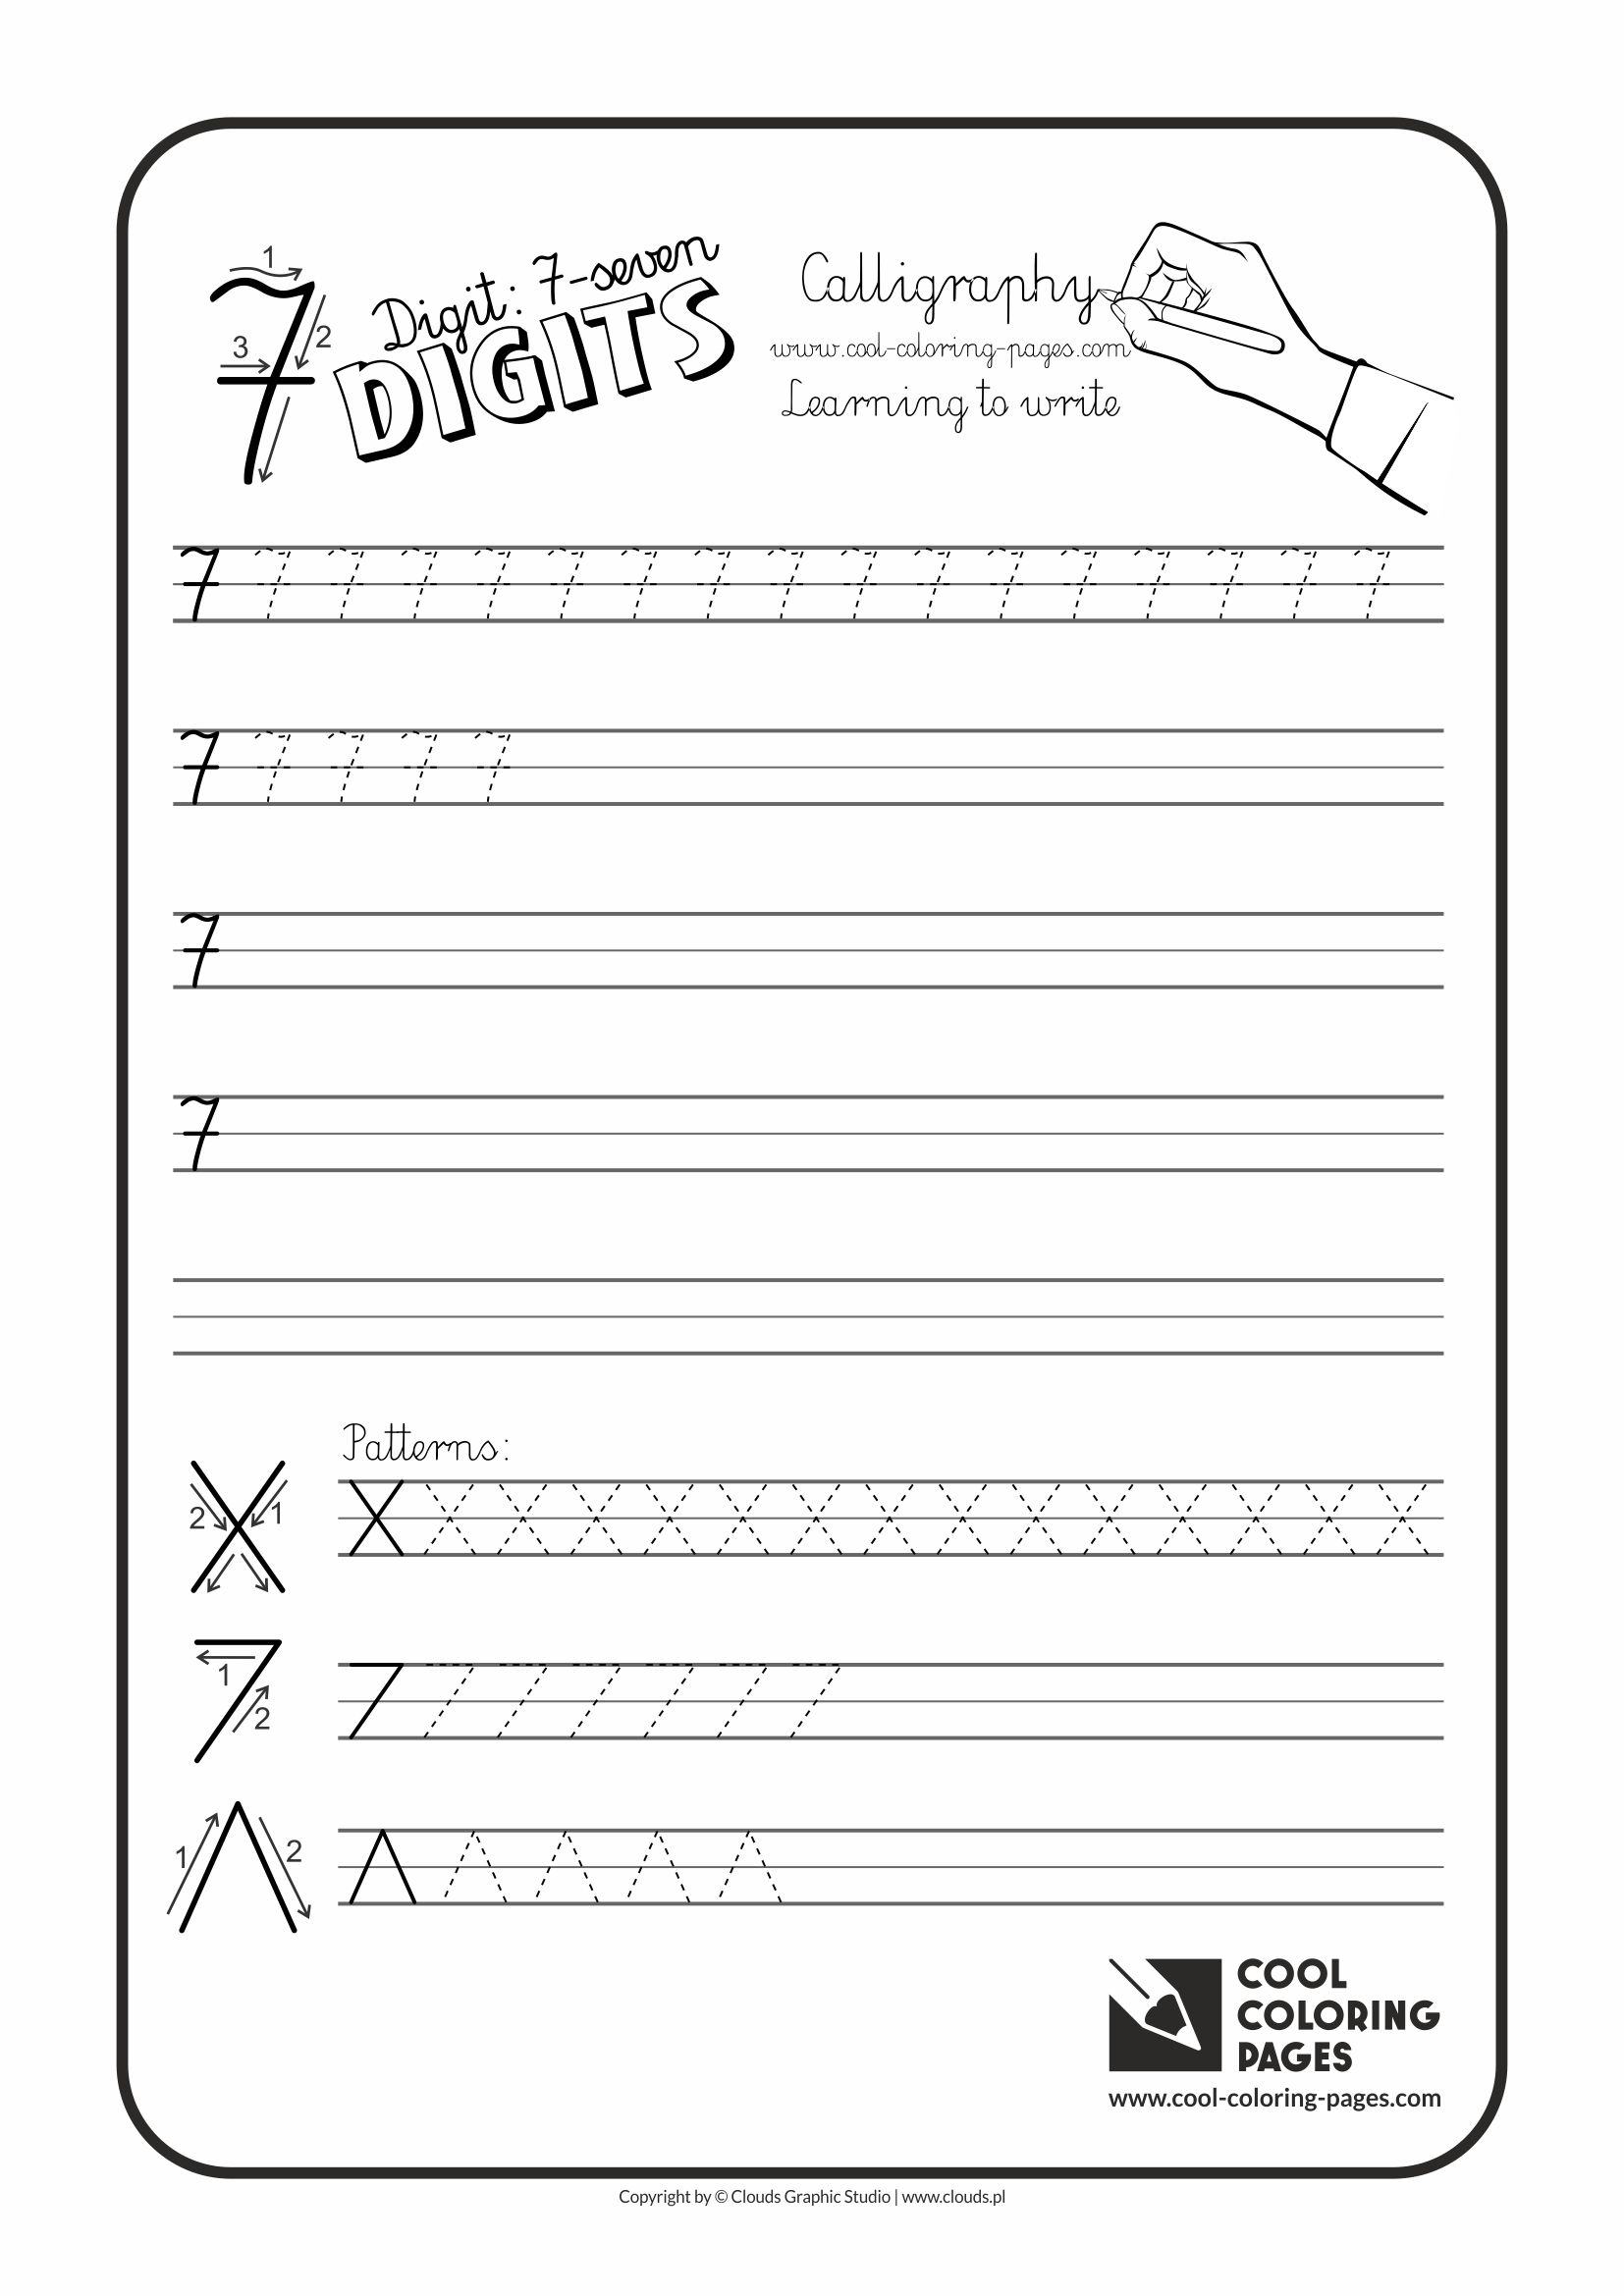 Cool Coloring Pages / Calligraphy / Digit 7 / Handwriting for kids